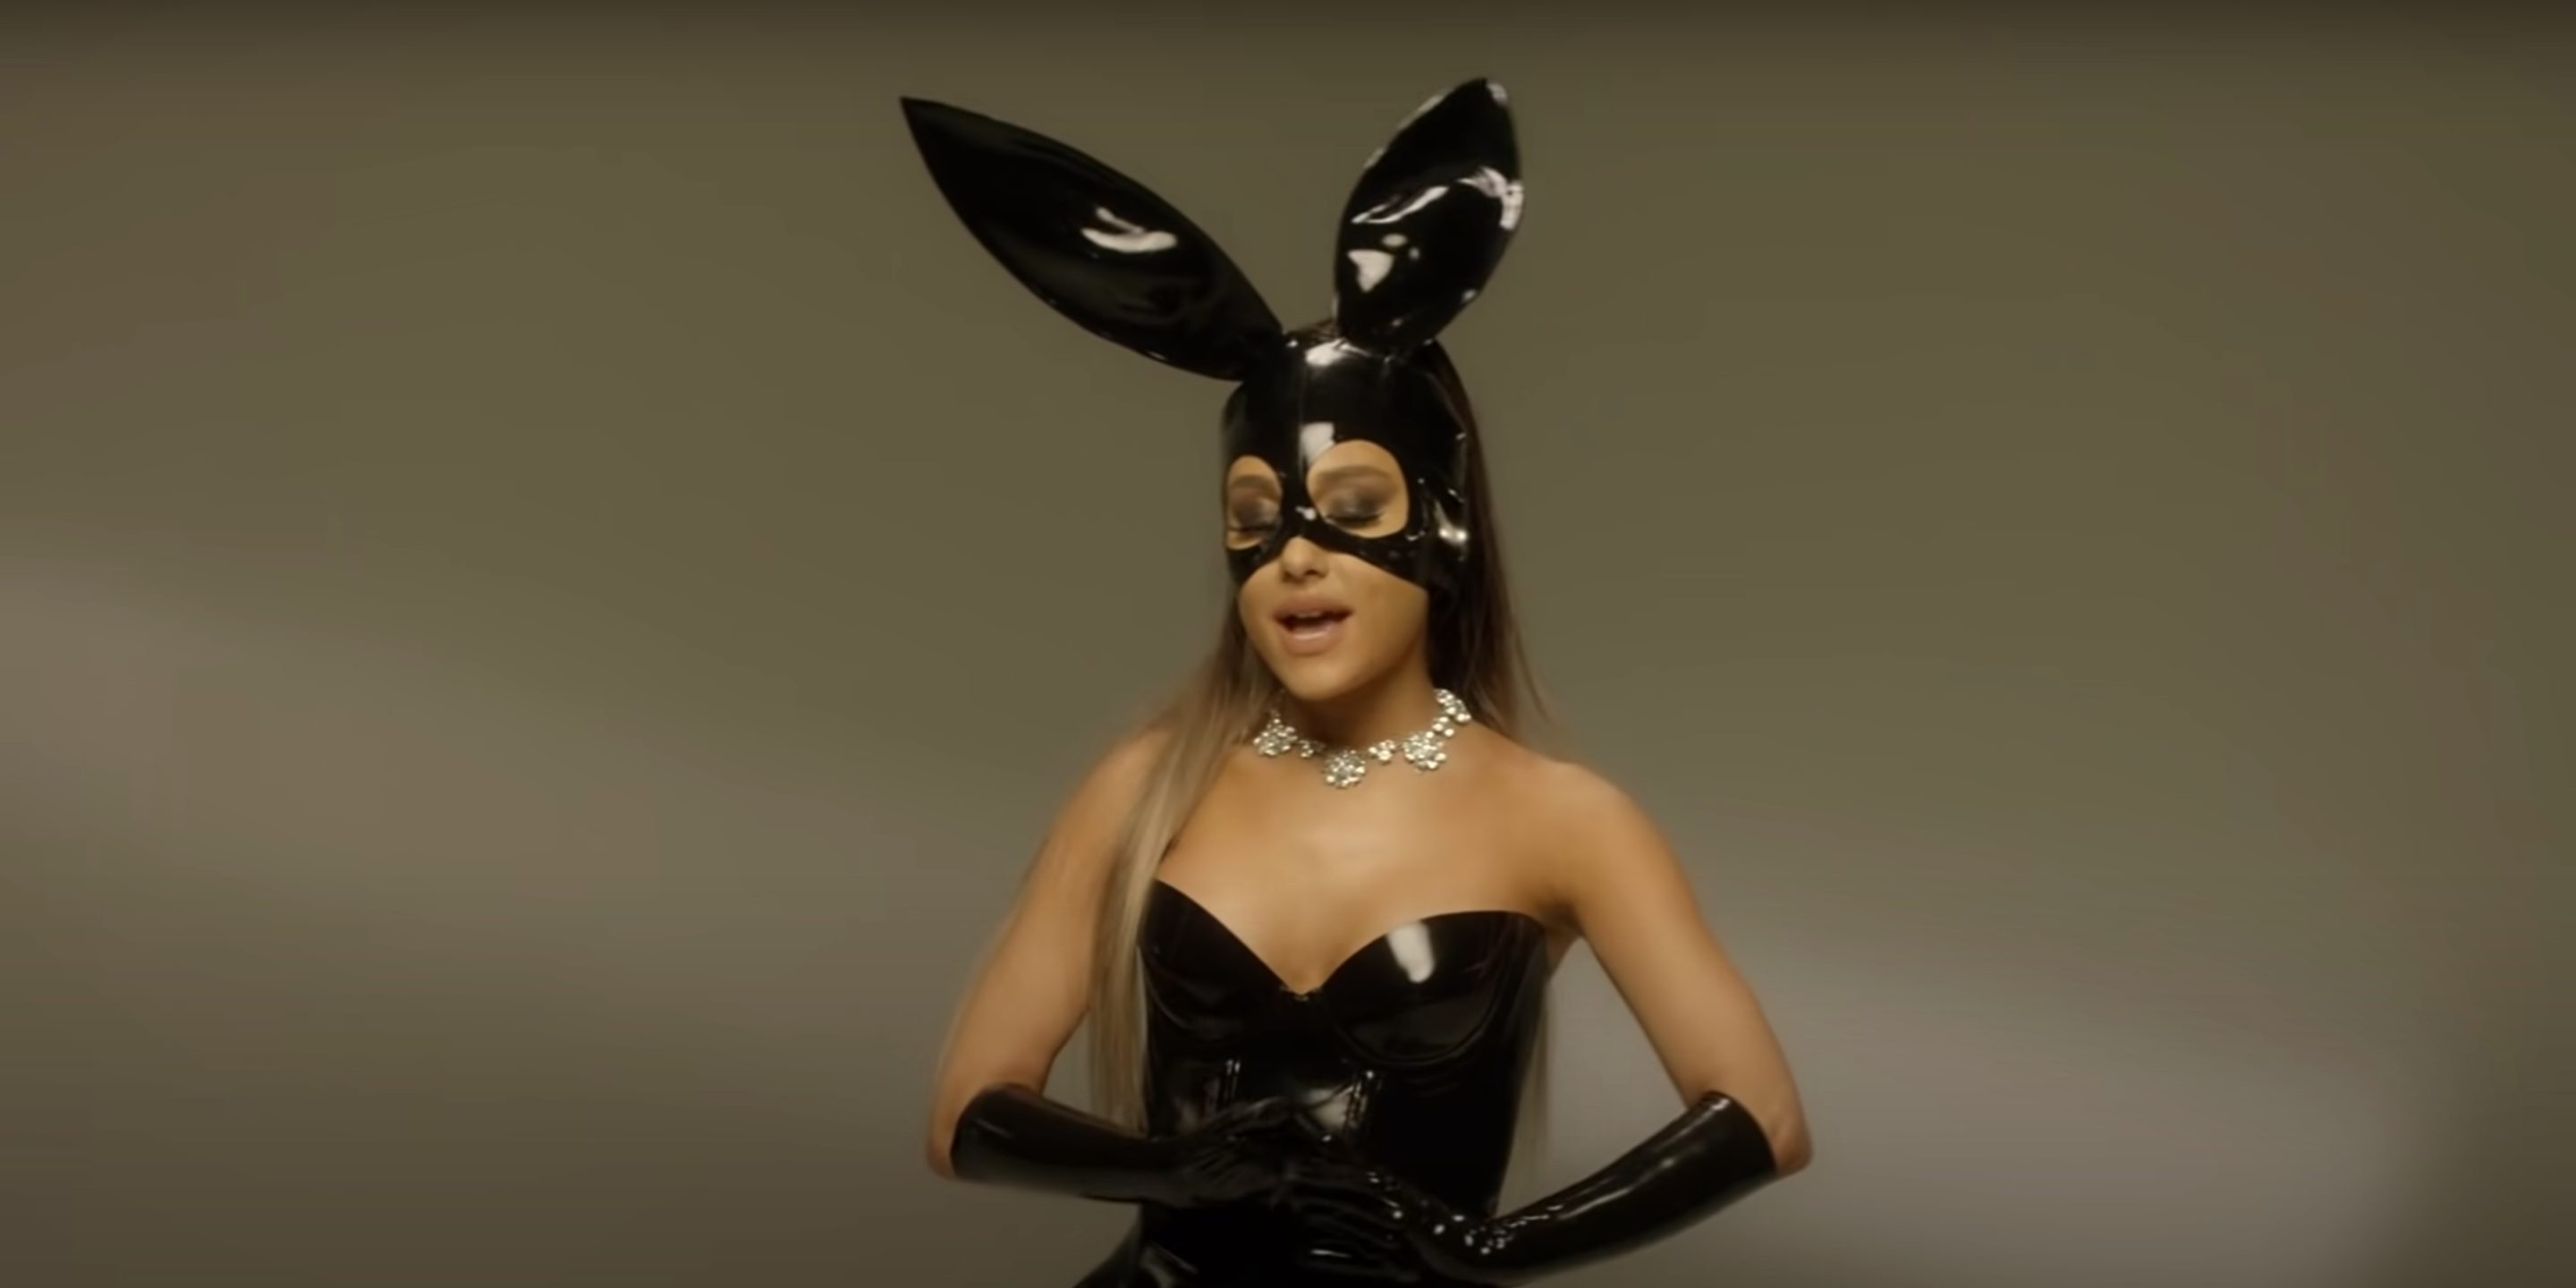 An image of Ariana Grande in a bunny costume performing Dangerous Woman.